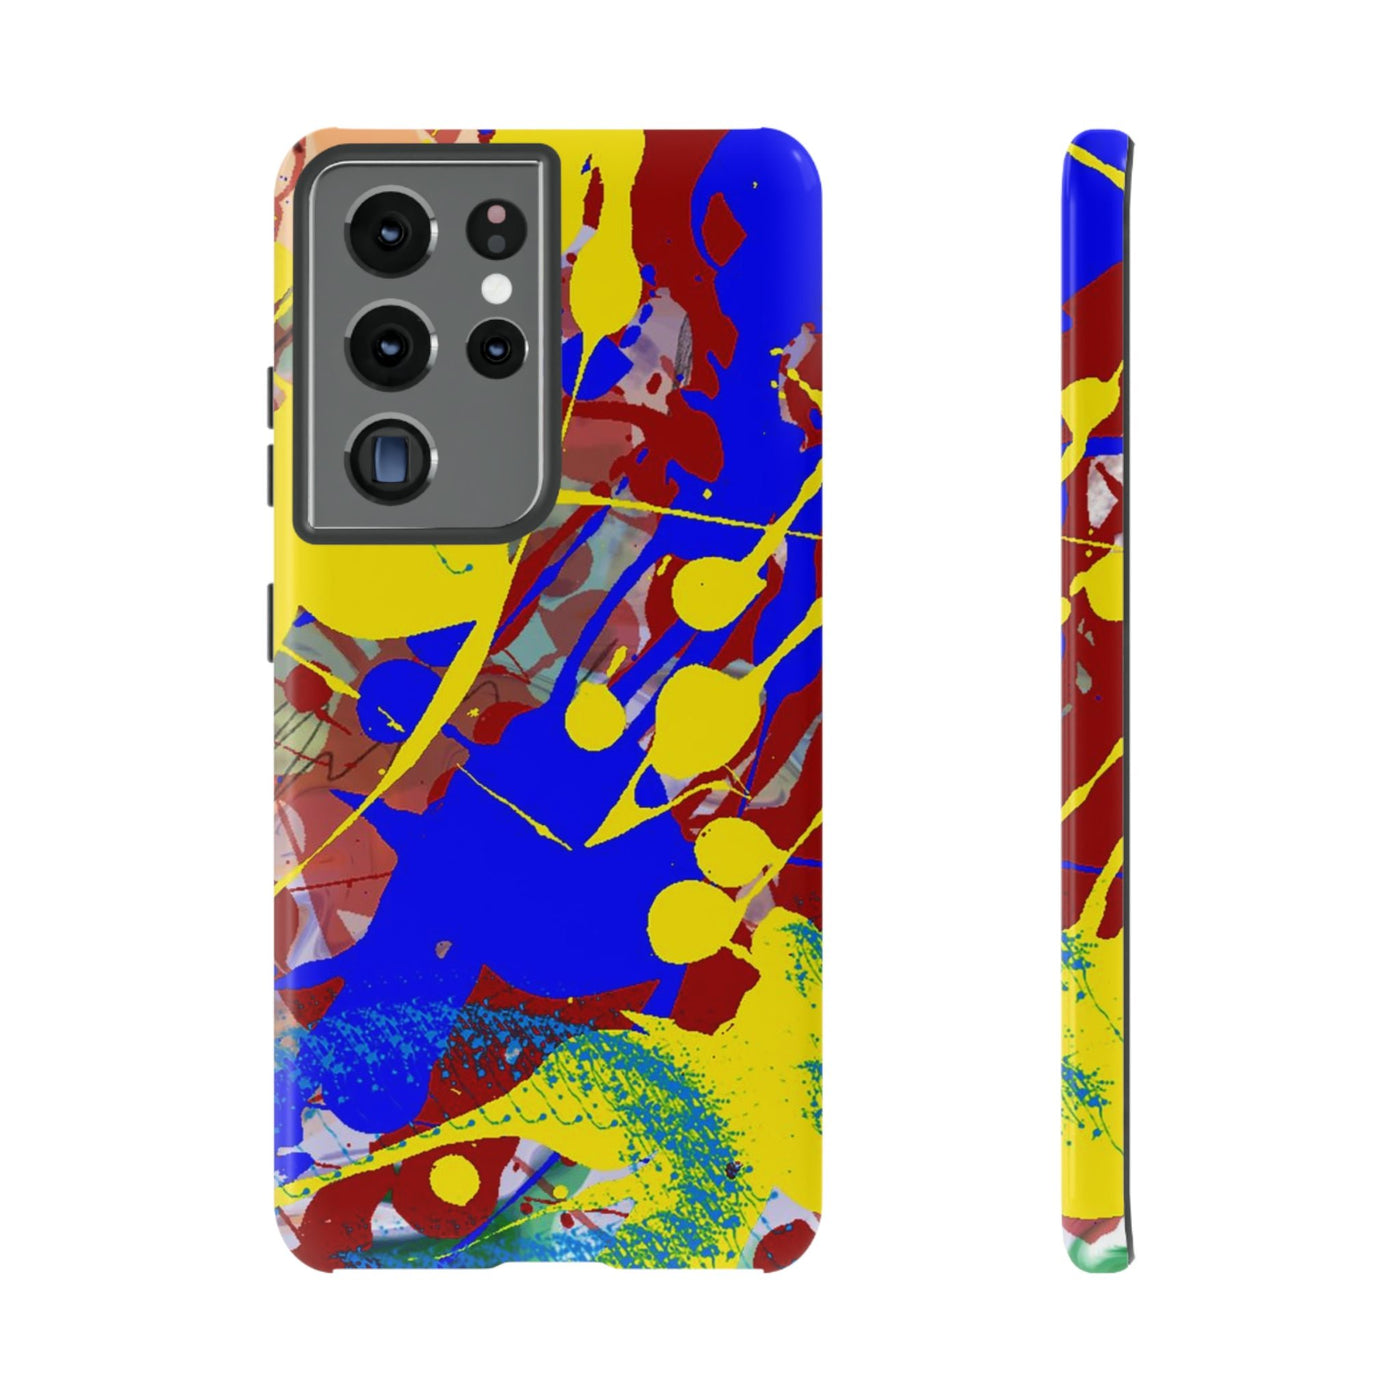 Samsung Galaxy Phone Case | Galaxy S23, S22, S21, S20 | Luxury Case Double Layered | Impact Resistant | Fashionable - Paint Spill 2 - Studio40ParkLane